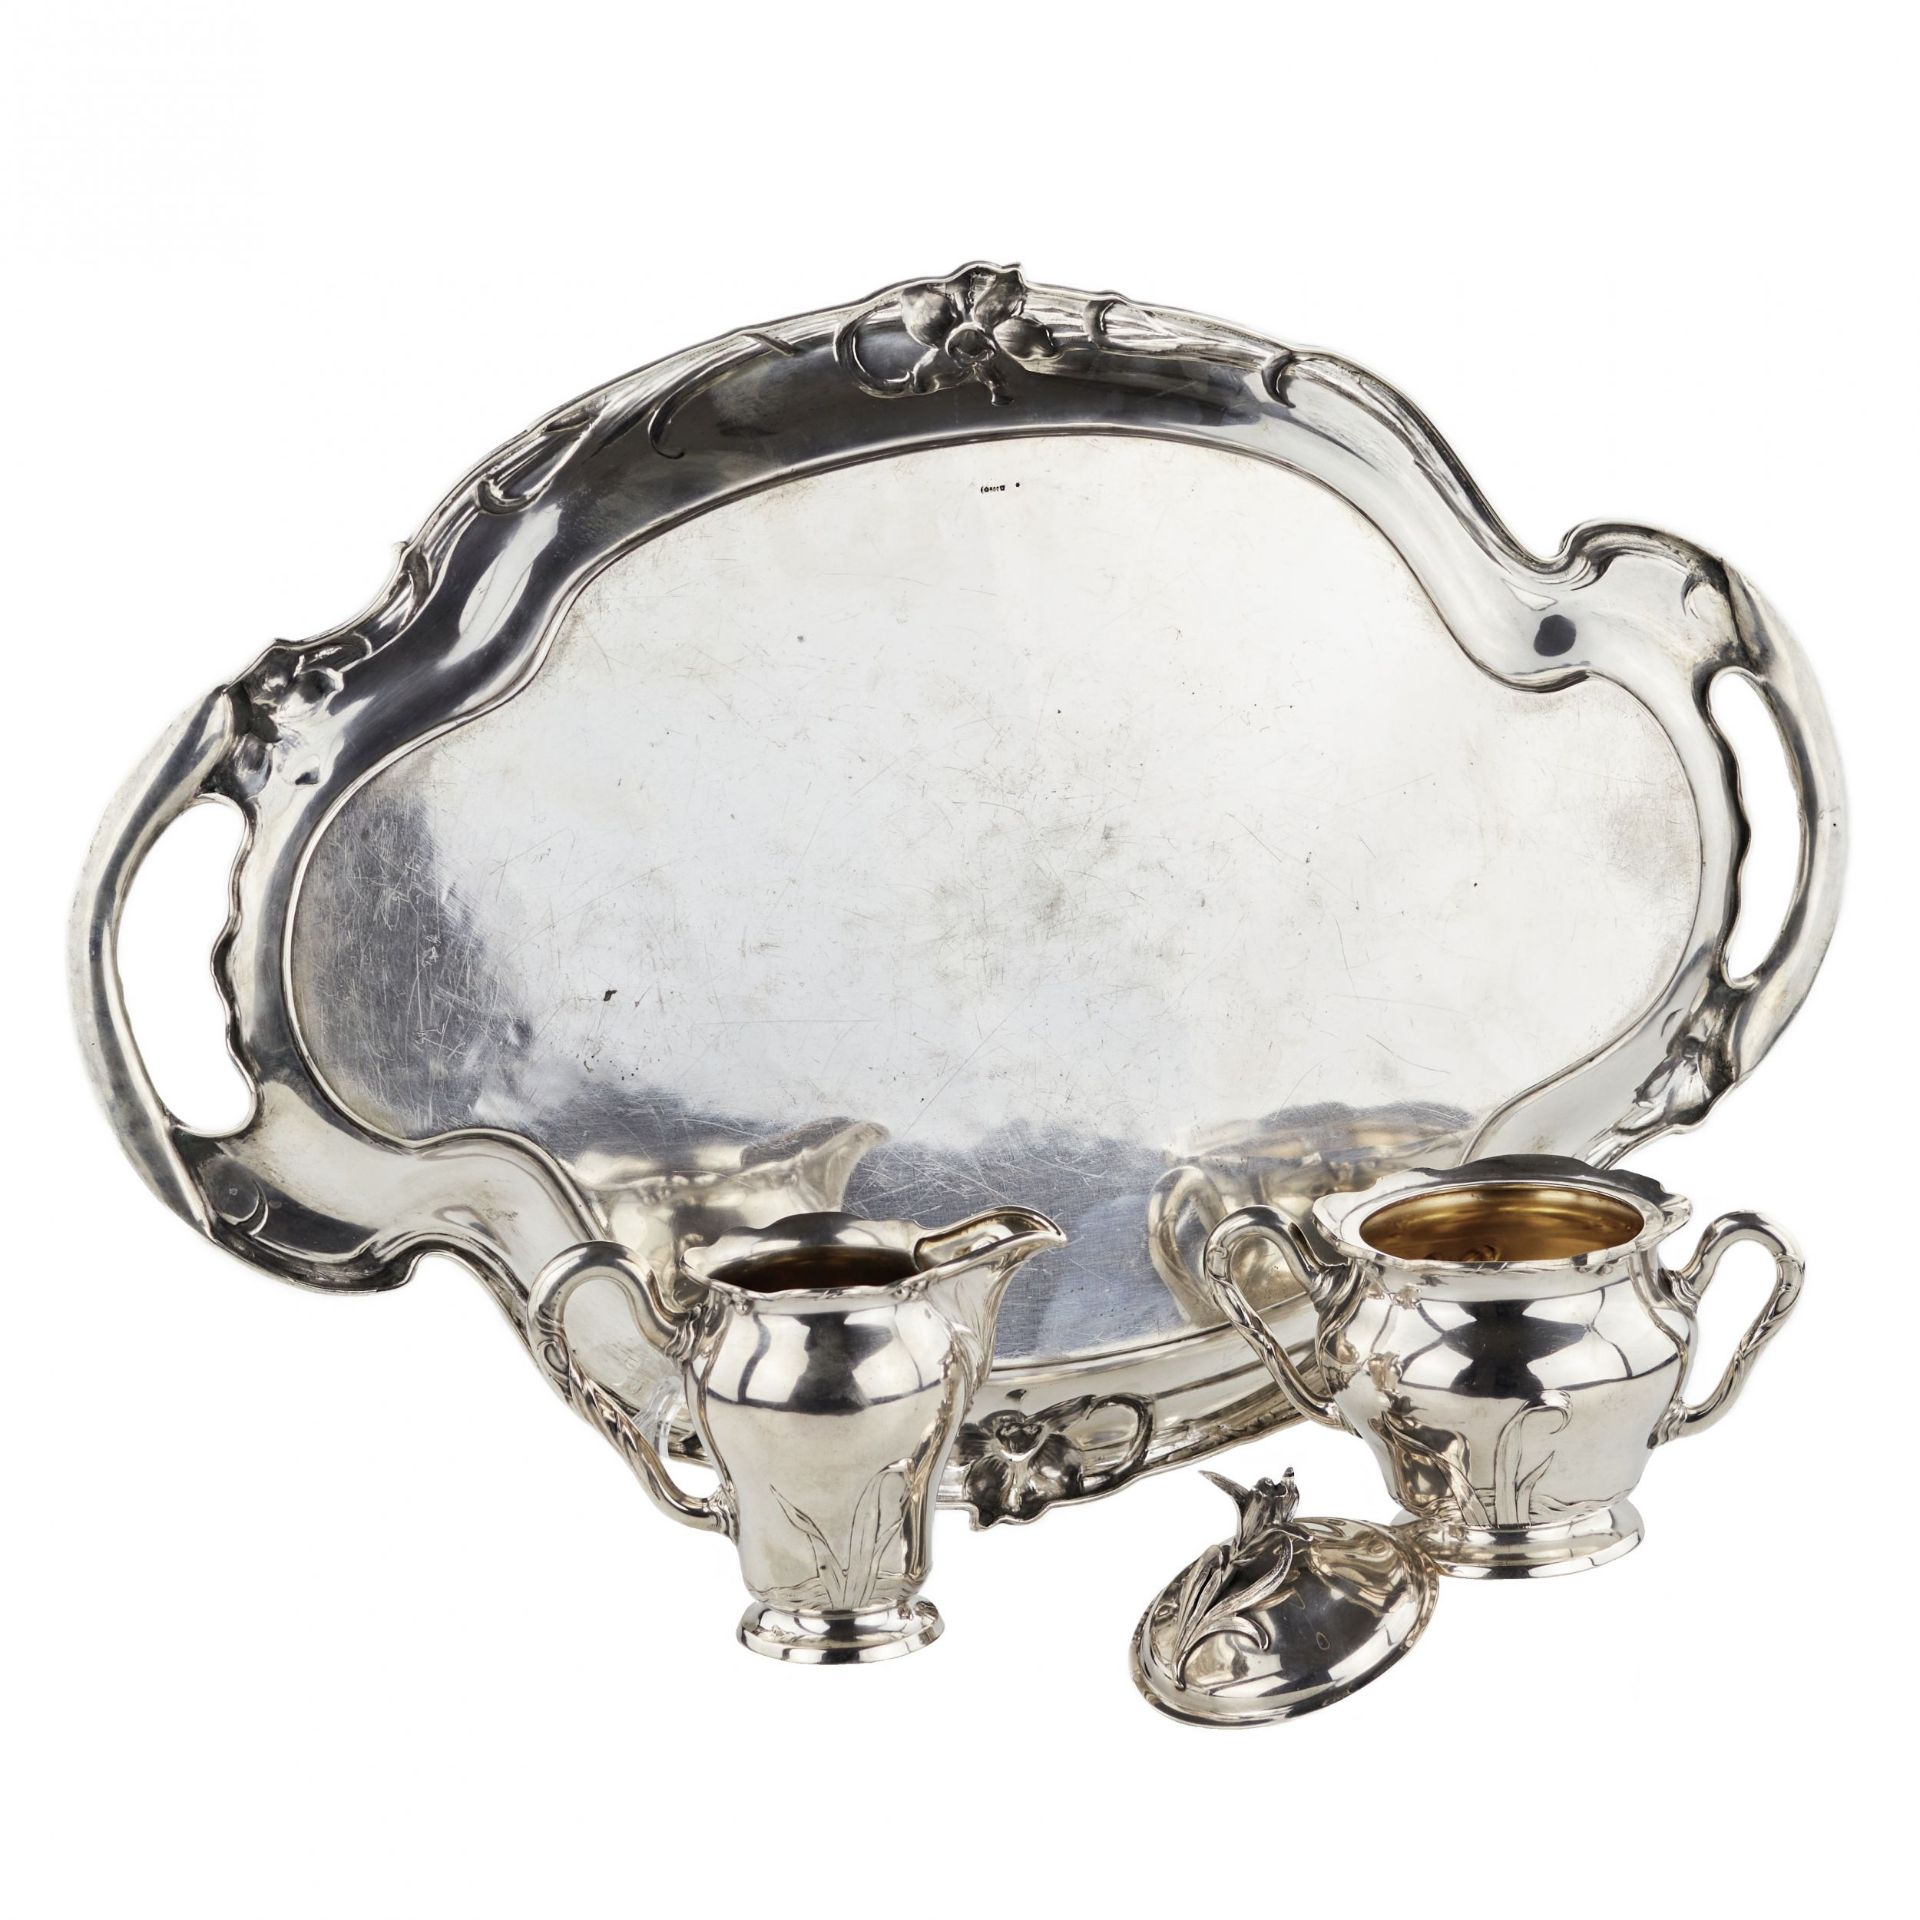 Silver tea and coffee service in Art Nouveau style. Bruckmann. After 1888. - Image 10 of 13